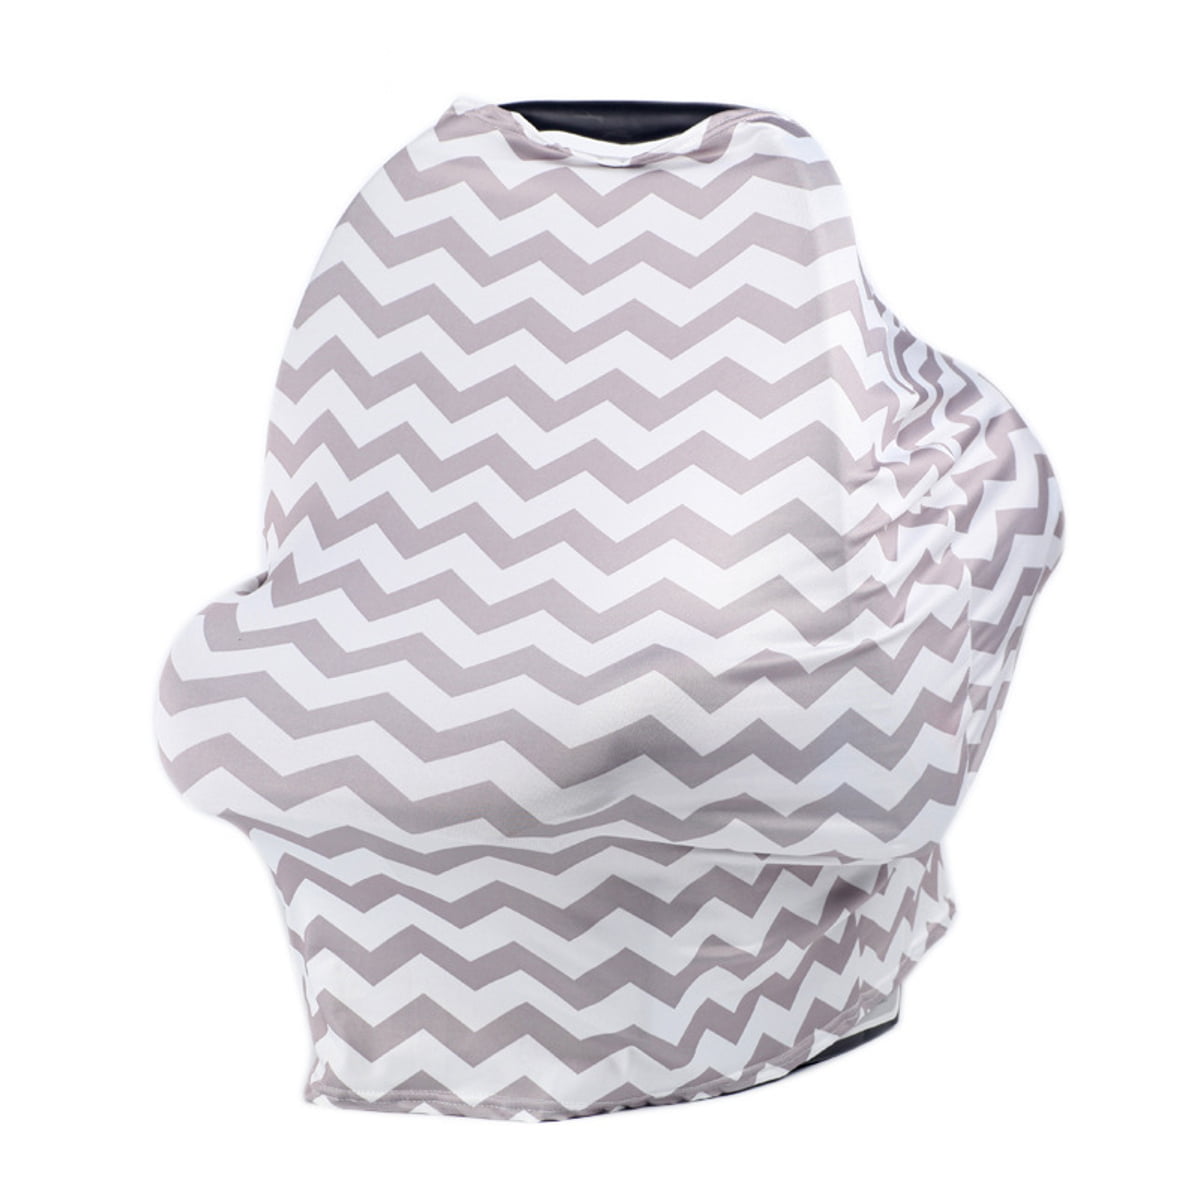 Breastfeeding Scarf with Sewn in Burp Cloth,Multi Use for Baby Car Seat,Covers Light Blanket Stroller Cover Metene Nursing Cover for Breastfeeding Infants